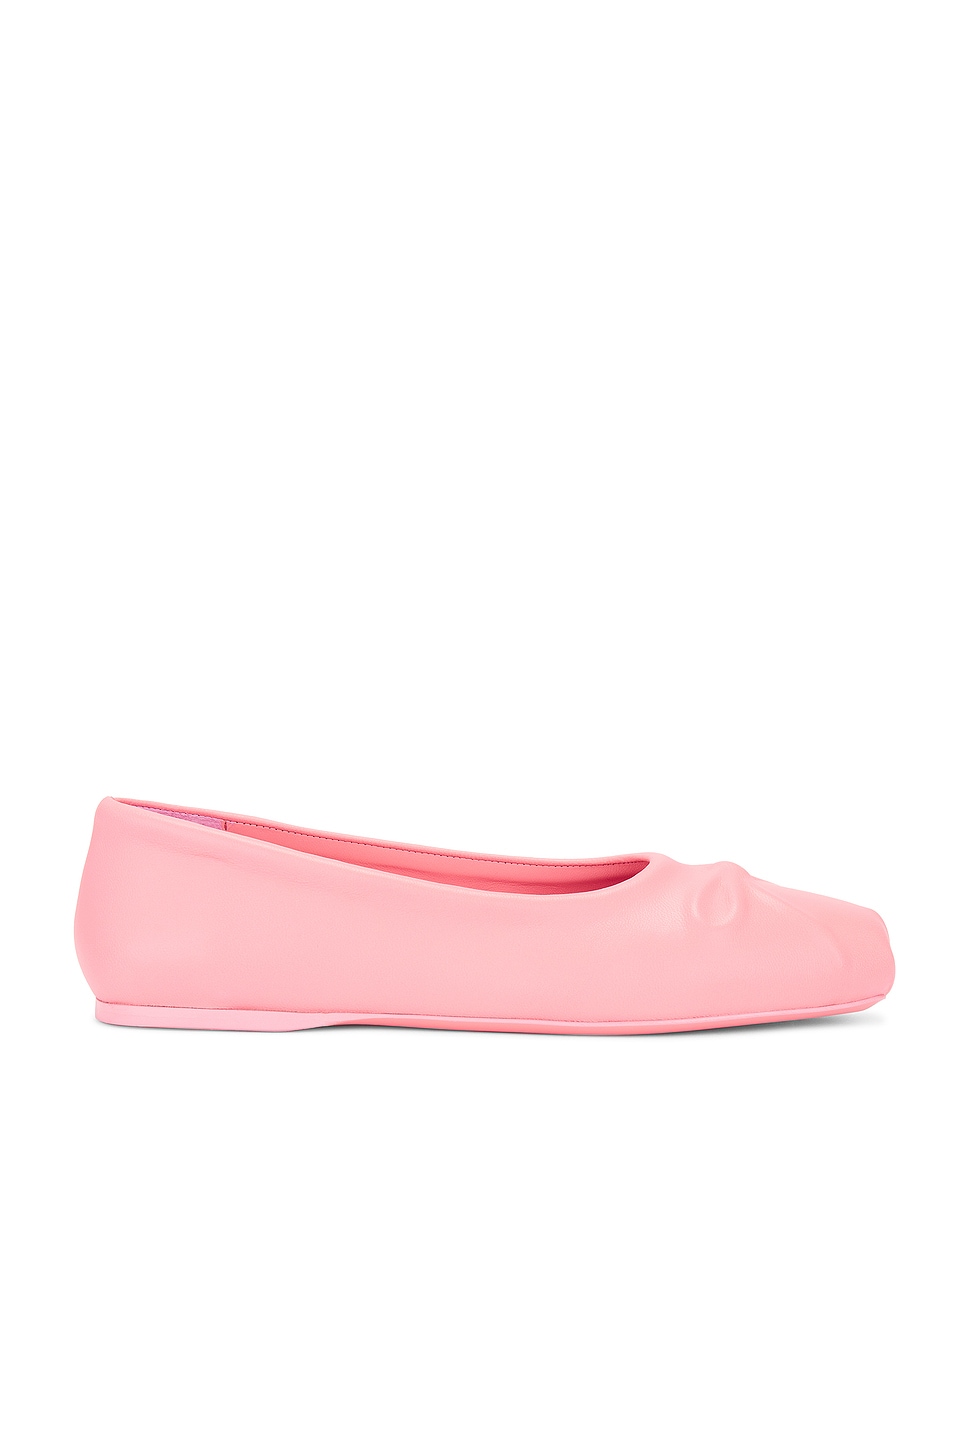 Image 1 of Marni Ballet Flat in Pink